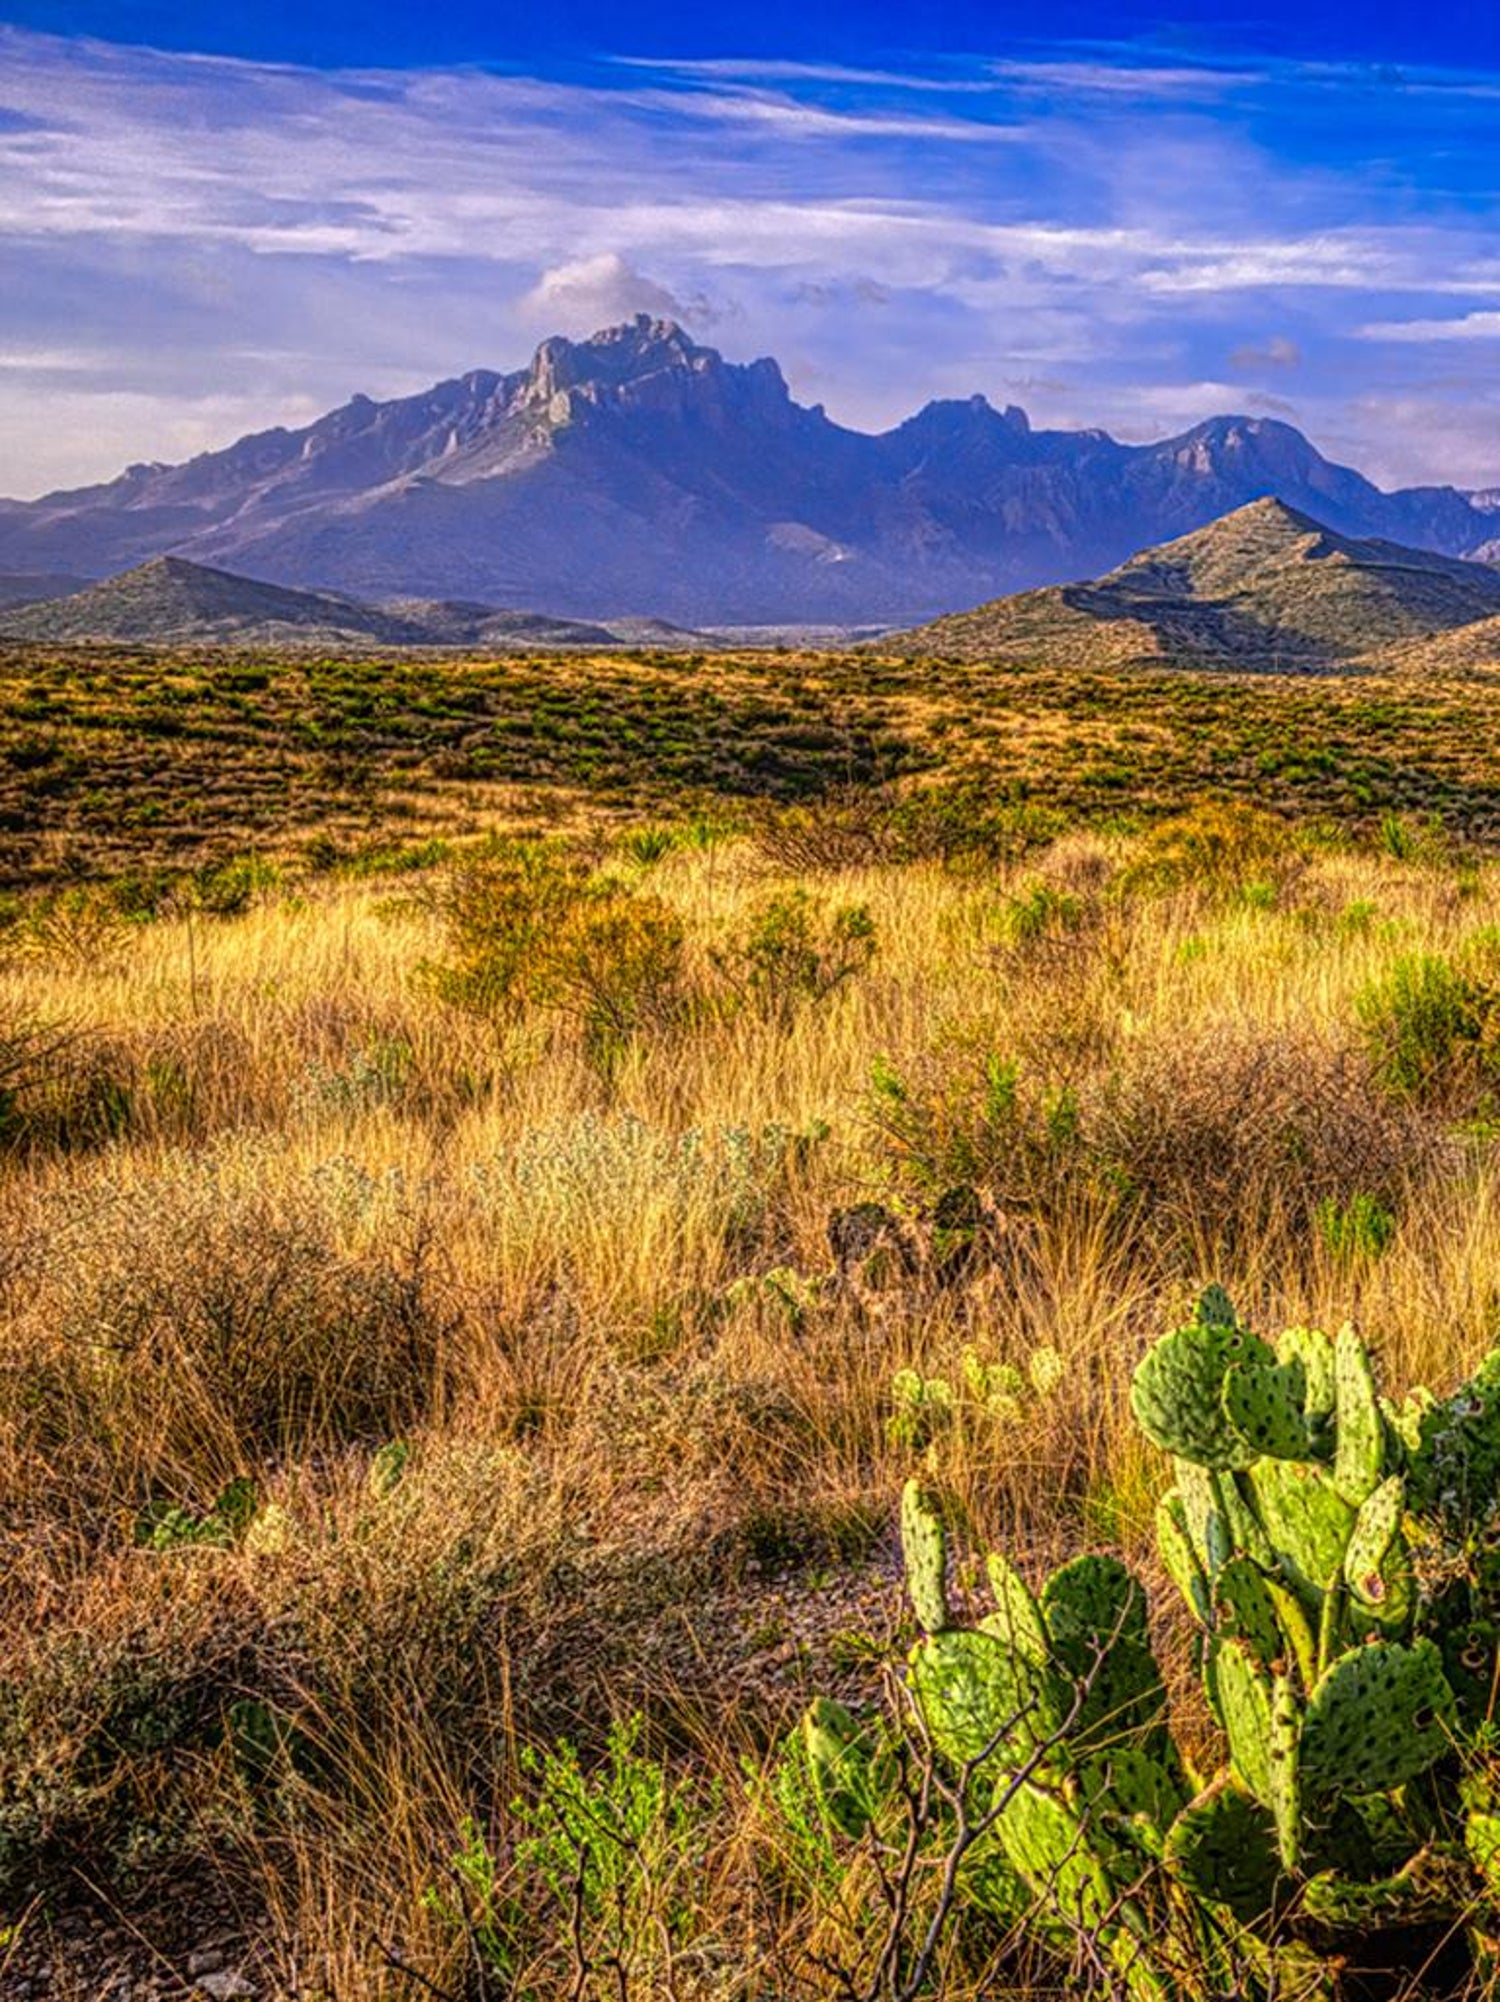 Alan Montgomery - Big Bend 1 - nature landscape with blue sky, mountains, tall grass and cacti For Sale at 1stDibs